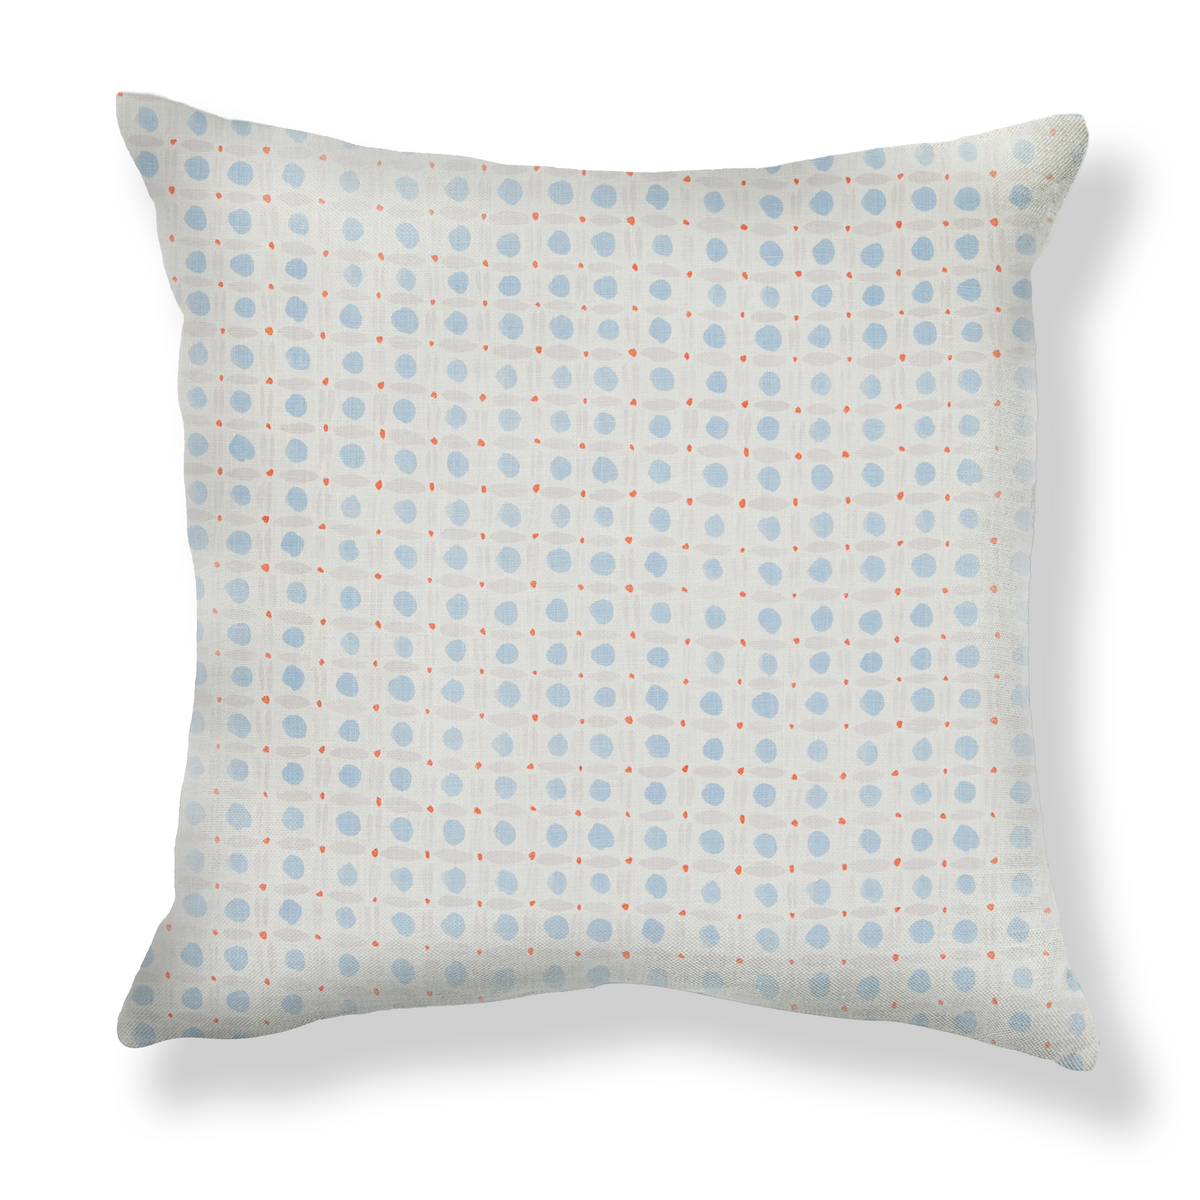 Spotted Grid Pillow in Sky/Tomato